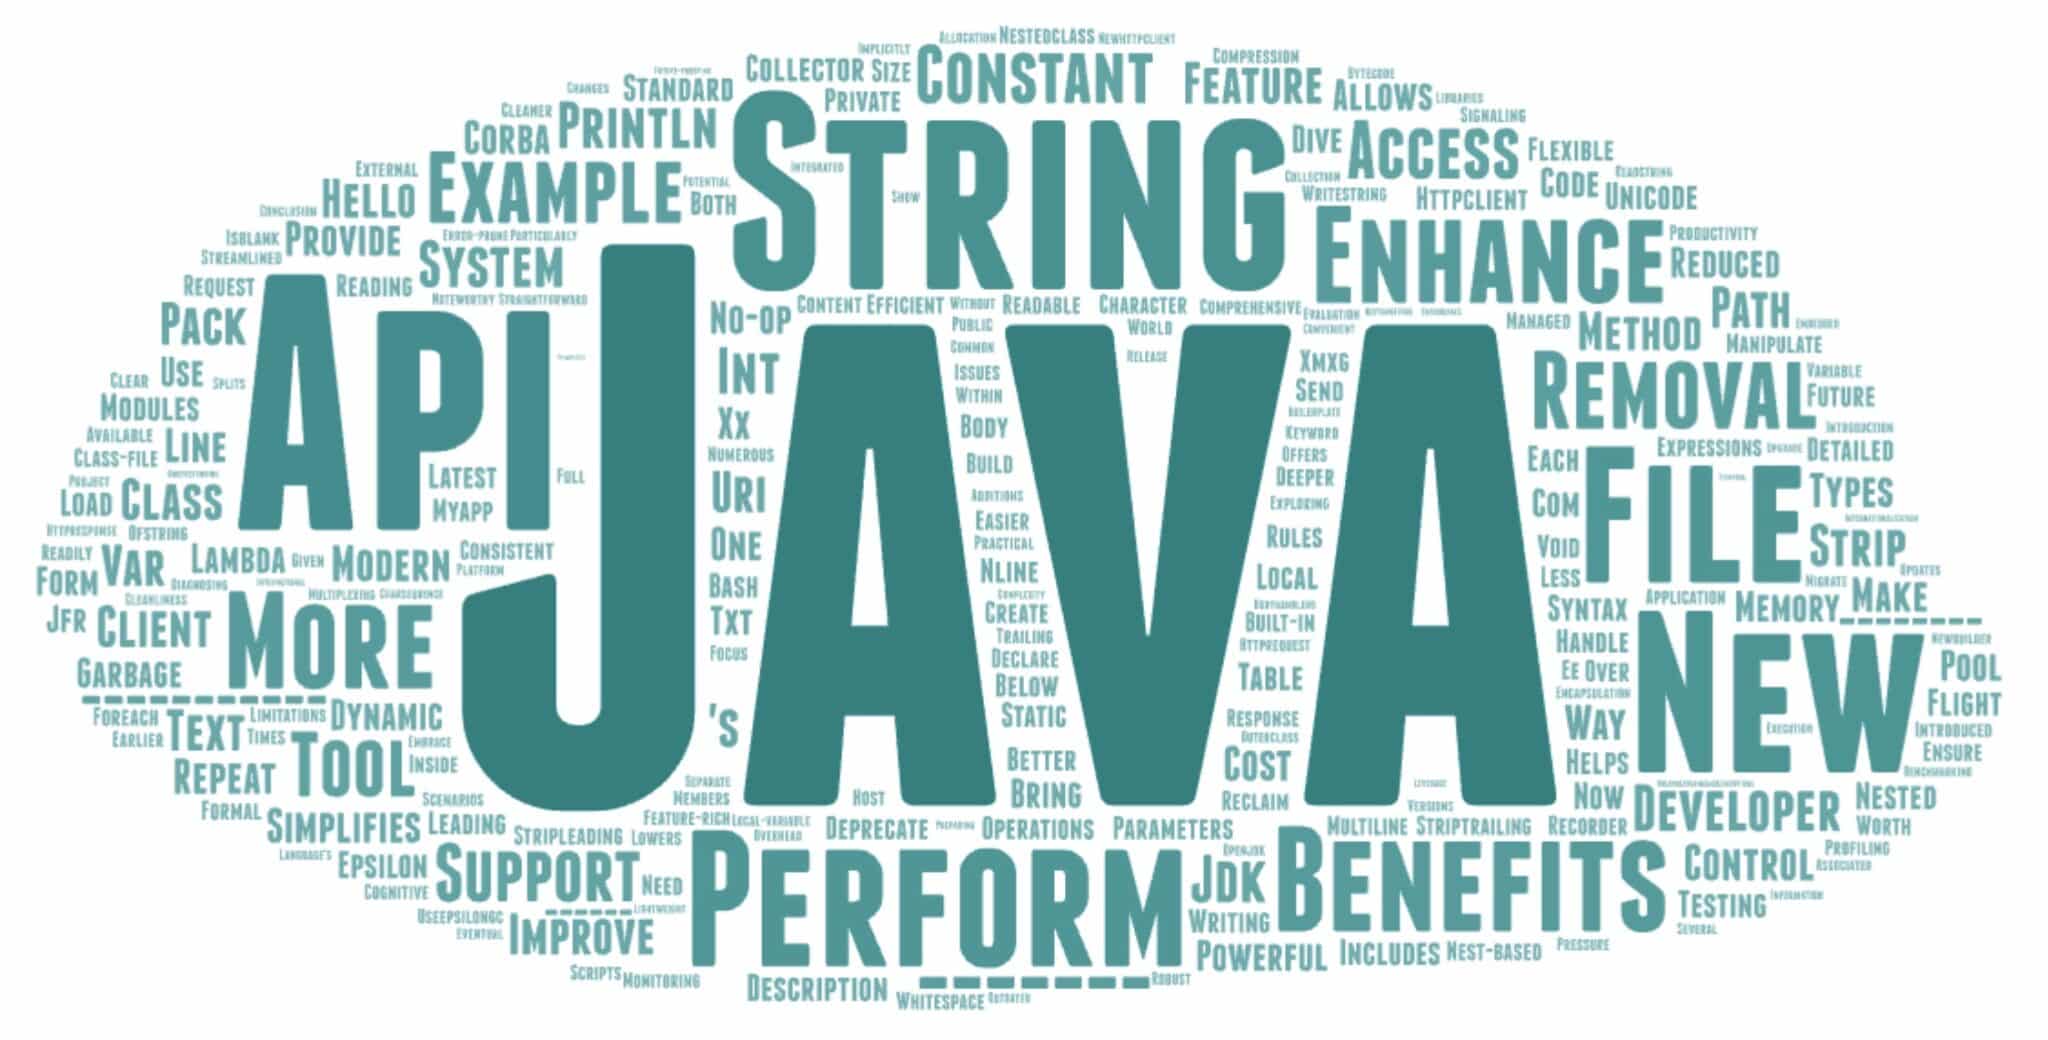 What's New in Java 11?